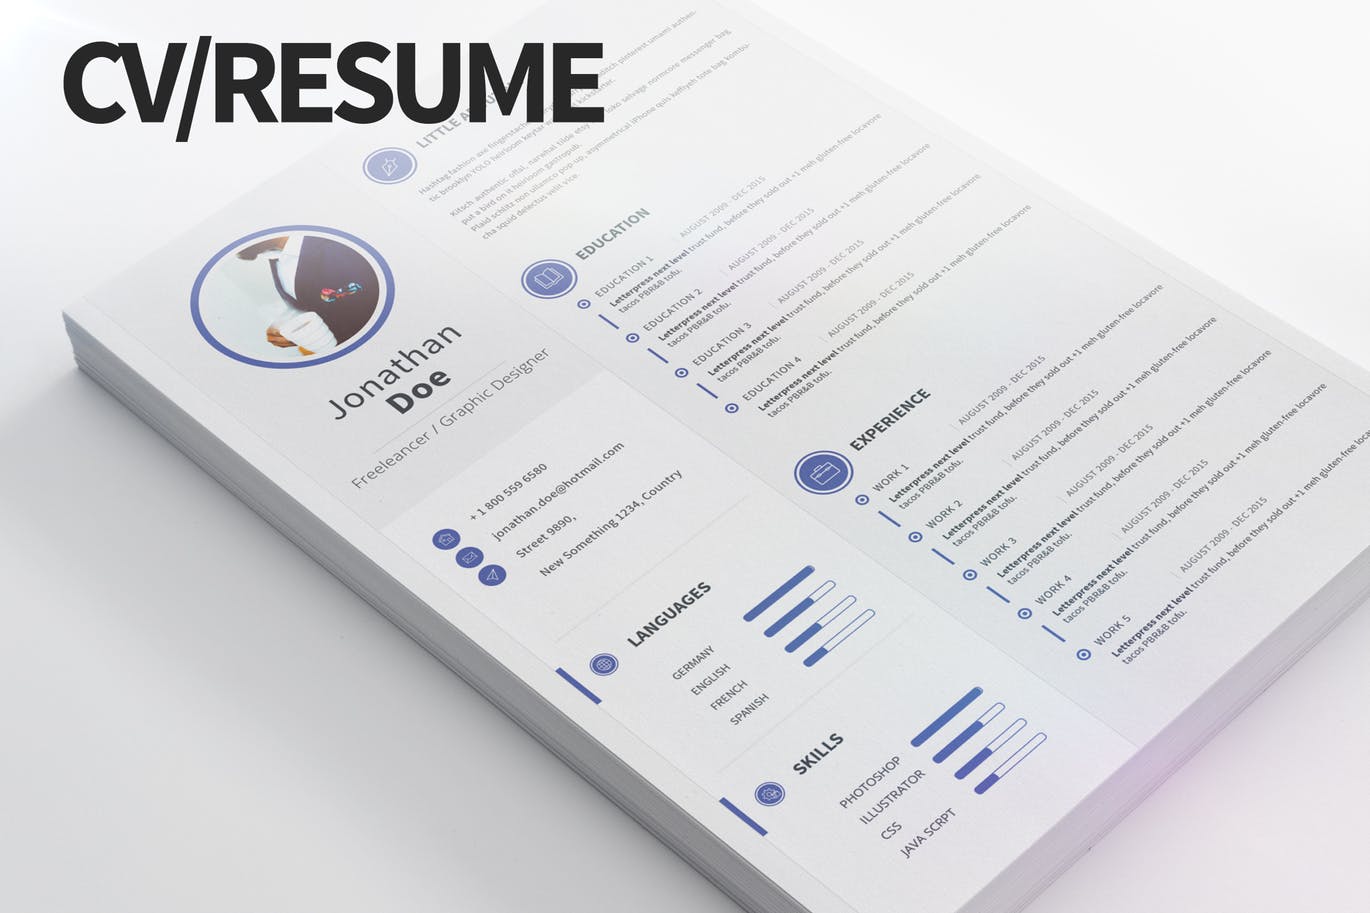 template resume free a resume template best cv resume templates of